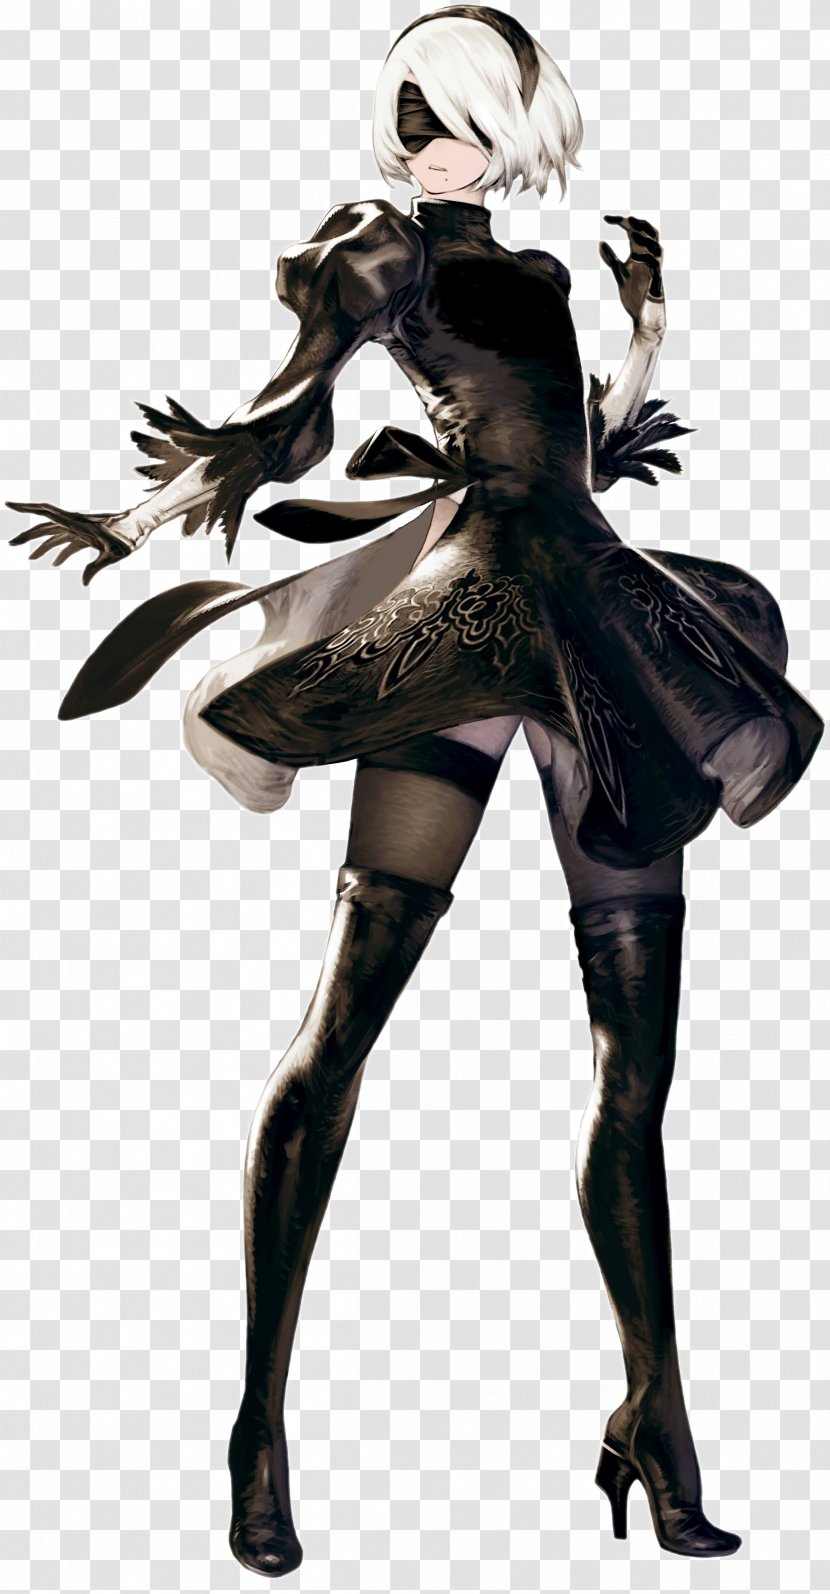 Nier: Automata Drakengard Bravely Default Valkyrie Anatomia: The Origin - Watercolor - Frame Transparent PNG